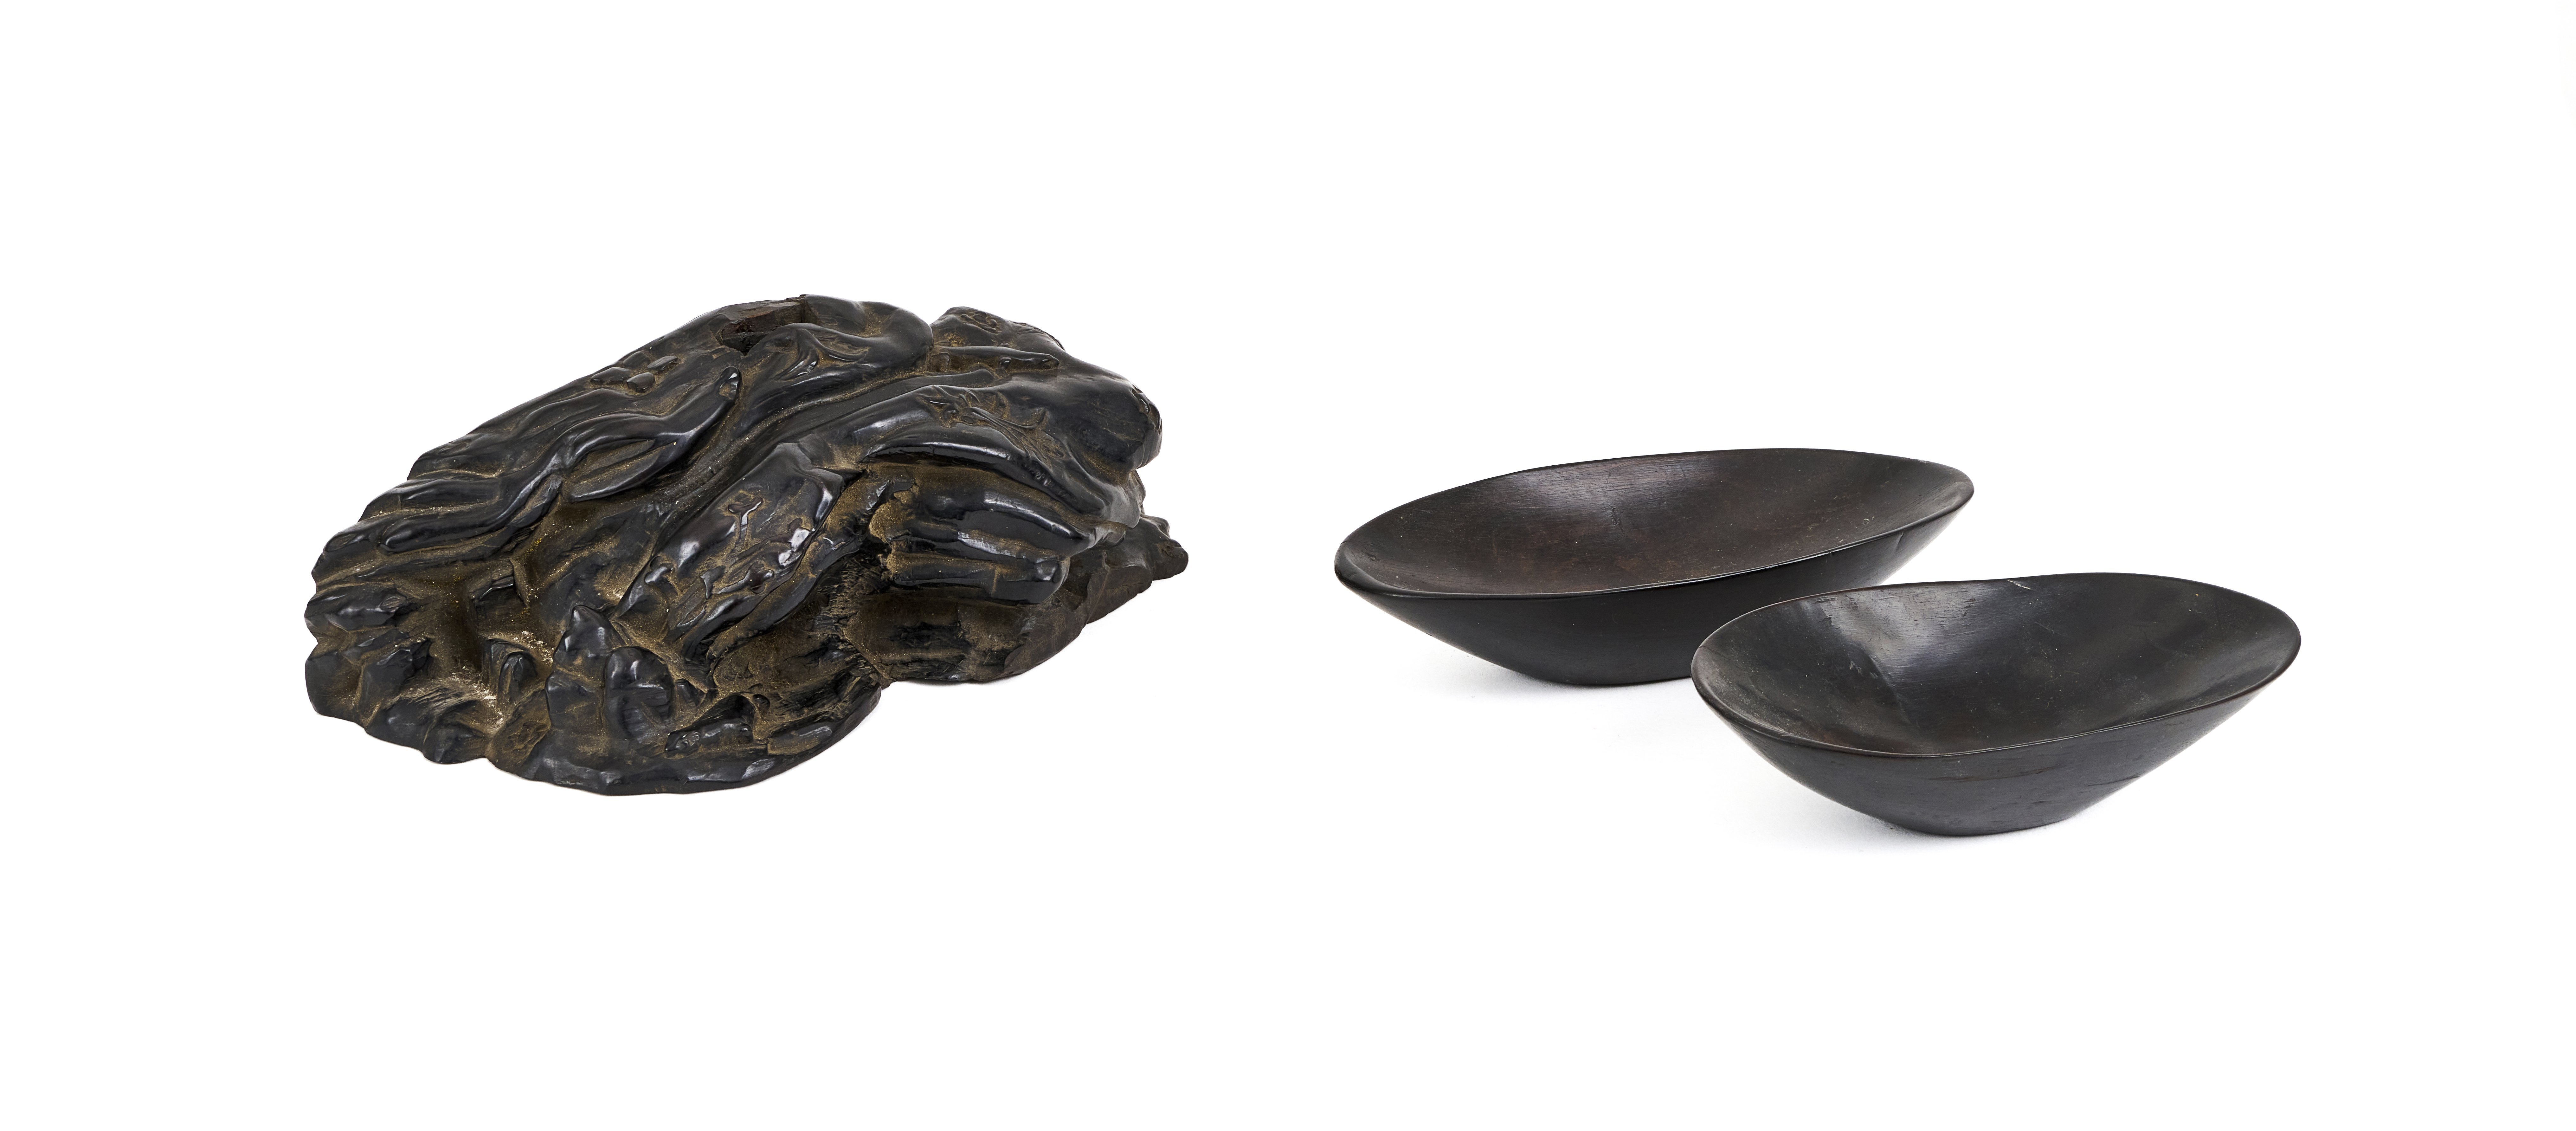 TWO ZITAN BOWLS & A STAND, PROBABLY ZITAN, QING DYNASTY (1644-1911)